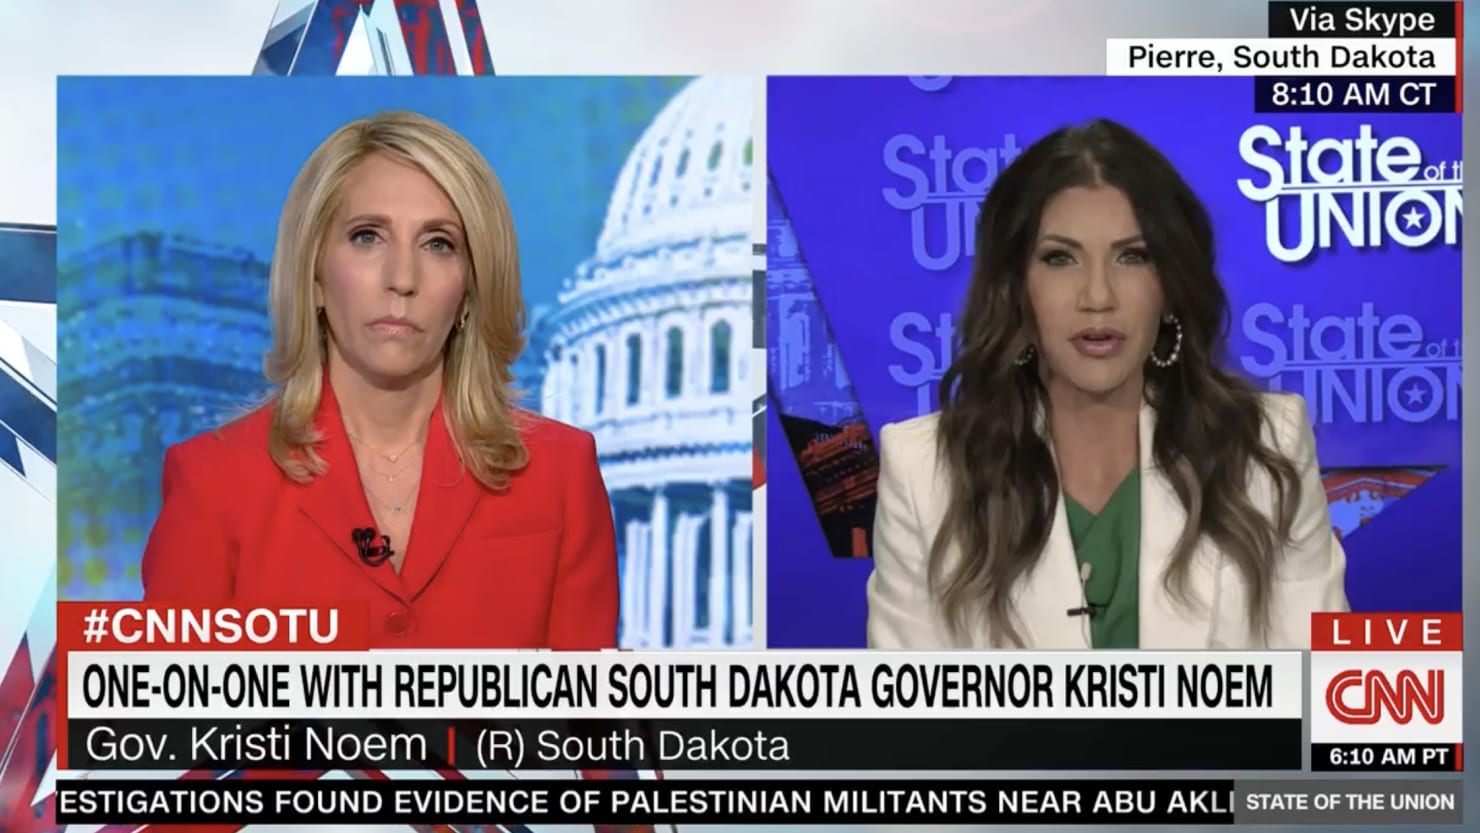 Kristi Noem Gets Grilled on Whether South Dakota Would Force 10-Year-Old to Have Baby - The Daily Beast